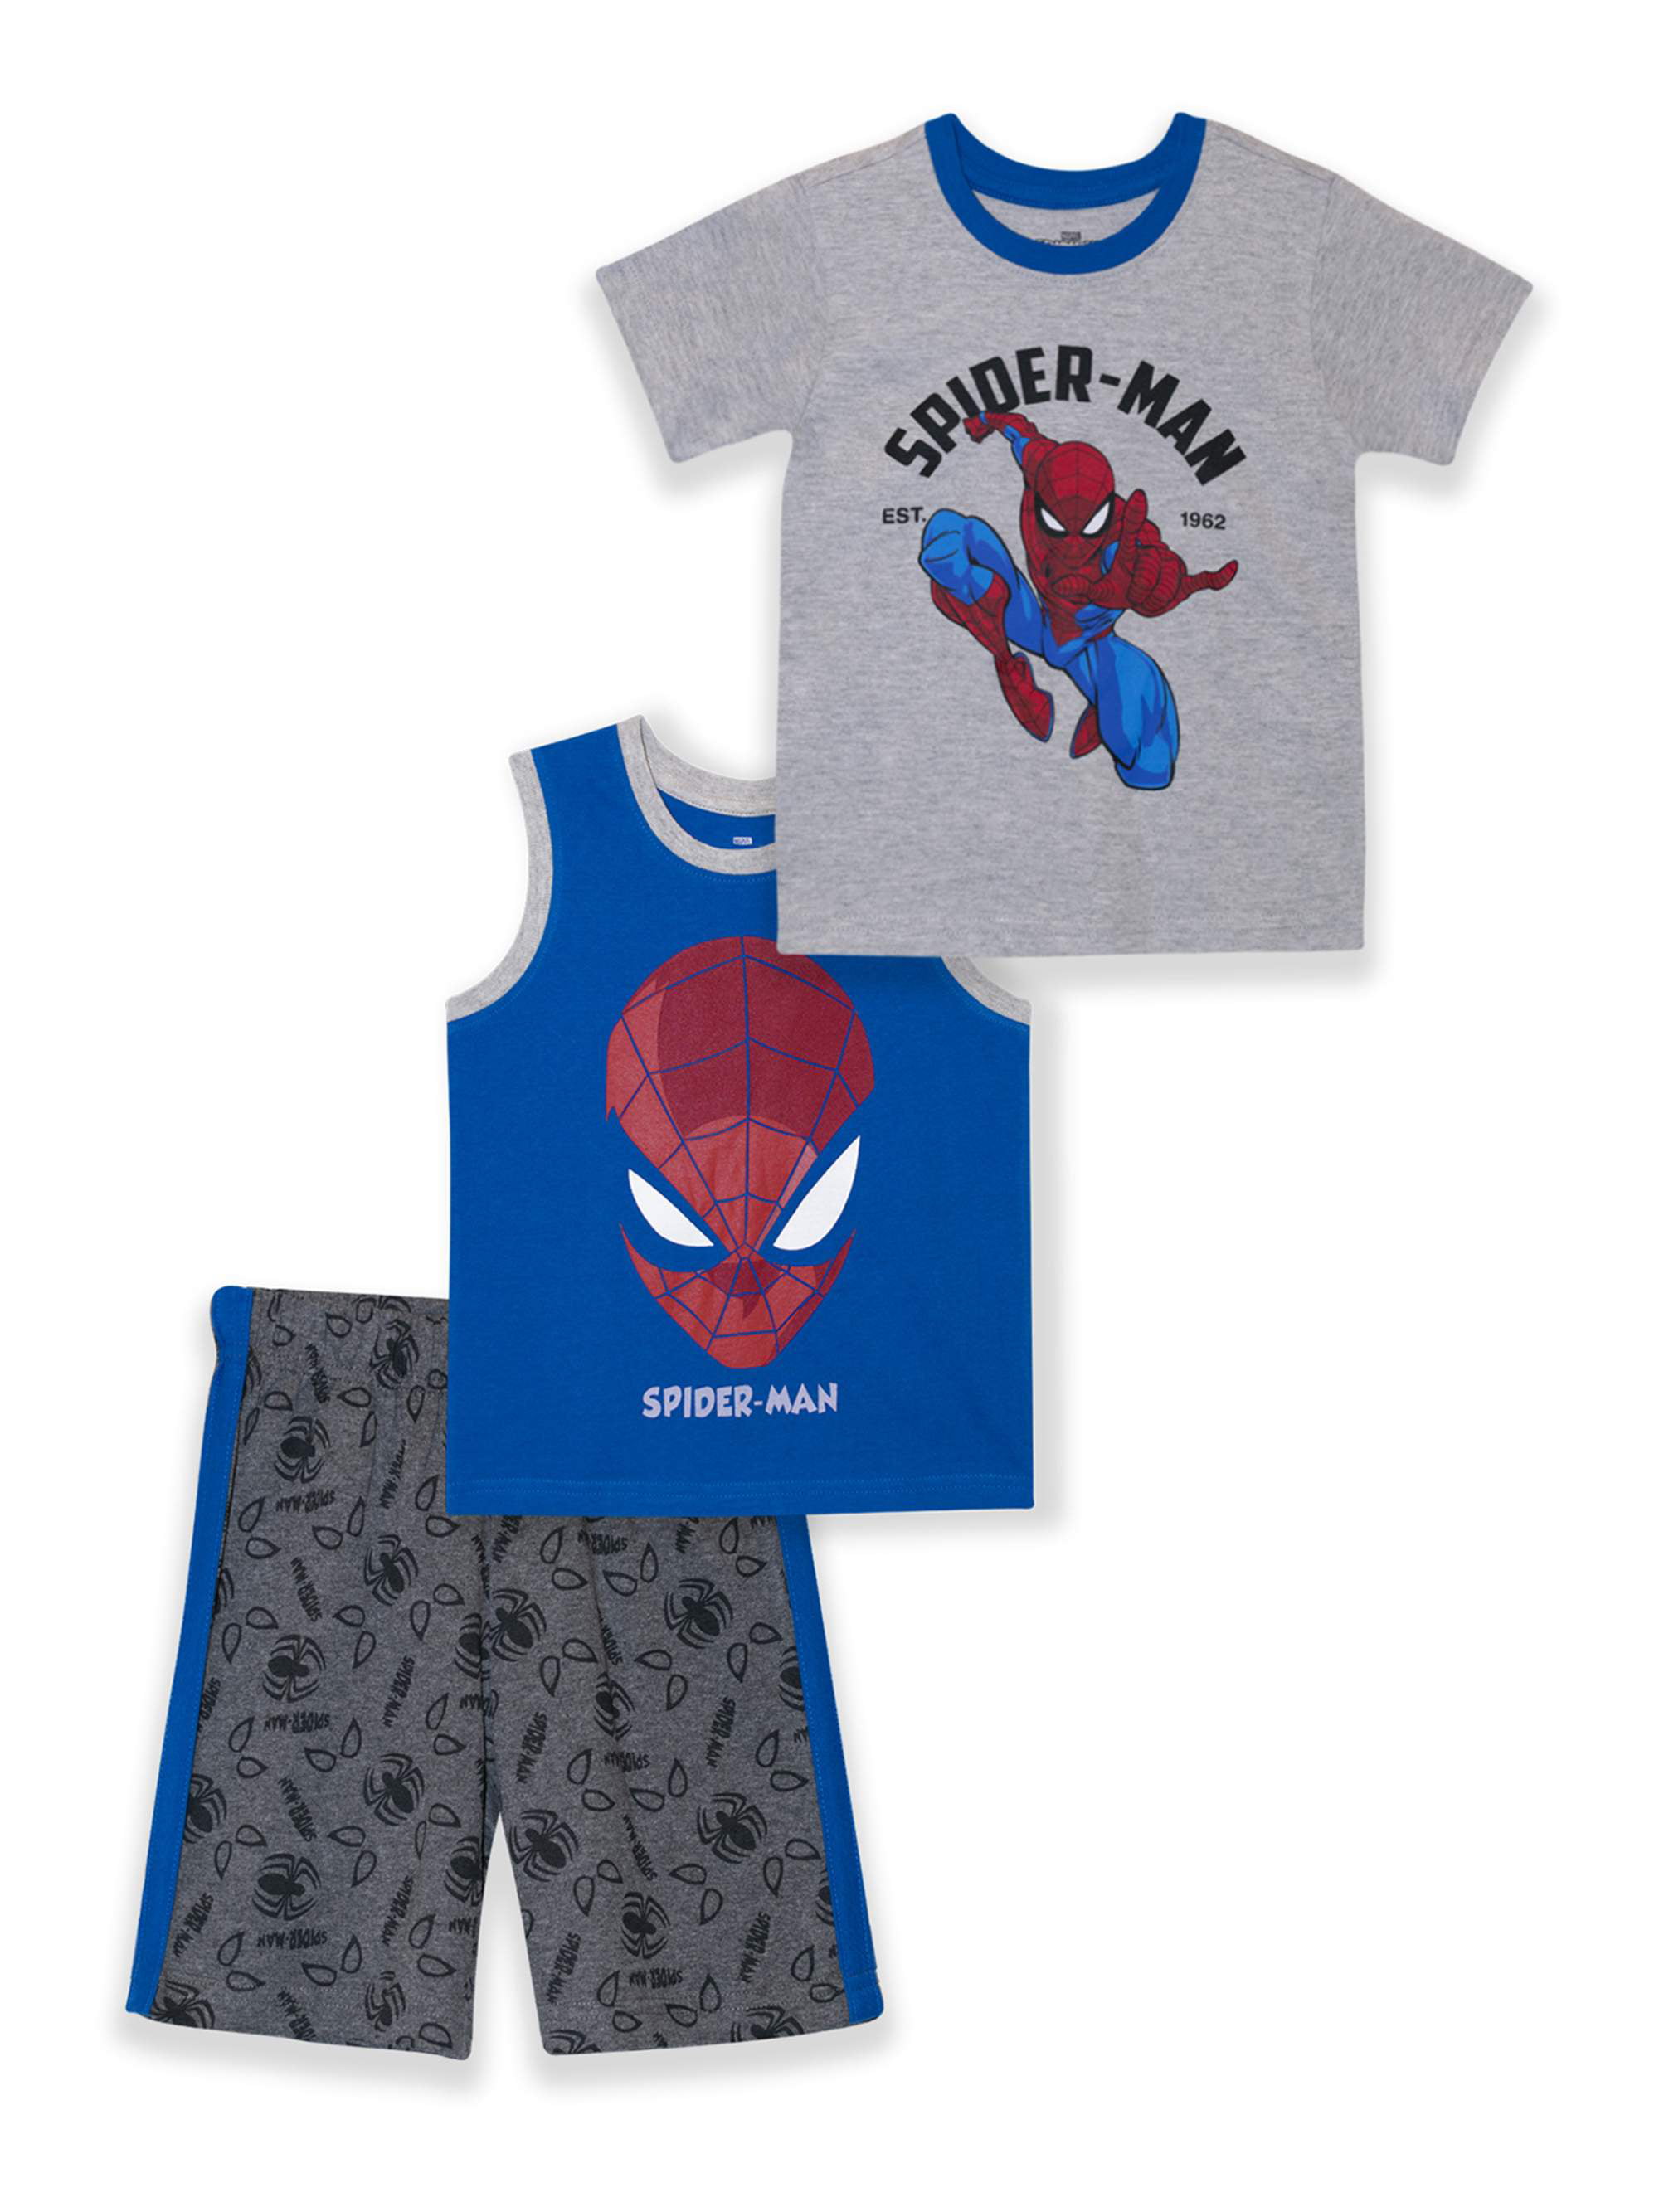 Spiderman Marvel Little Boys Set  2 Pc /T-shirt & Short/ Red and Gray/ 4-7/NEW